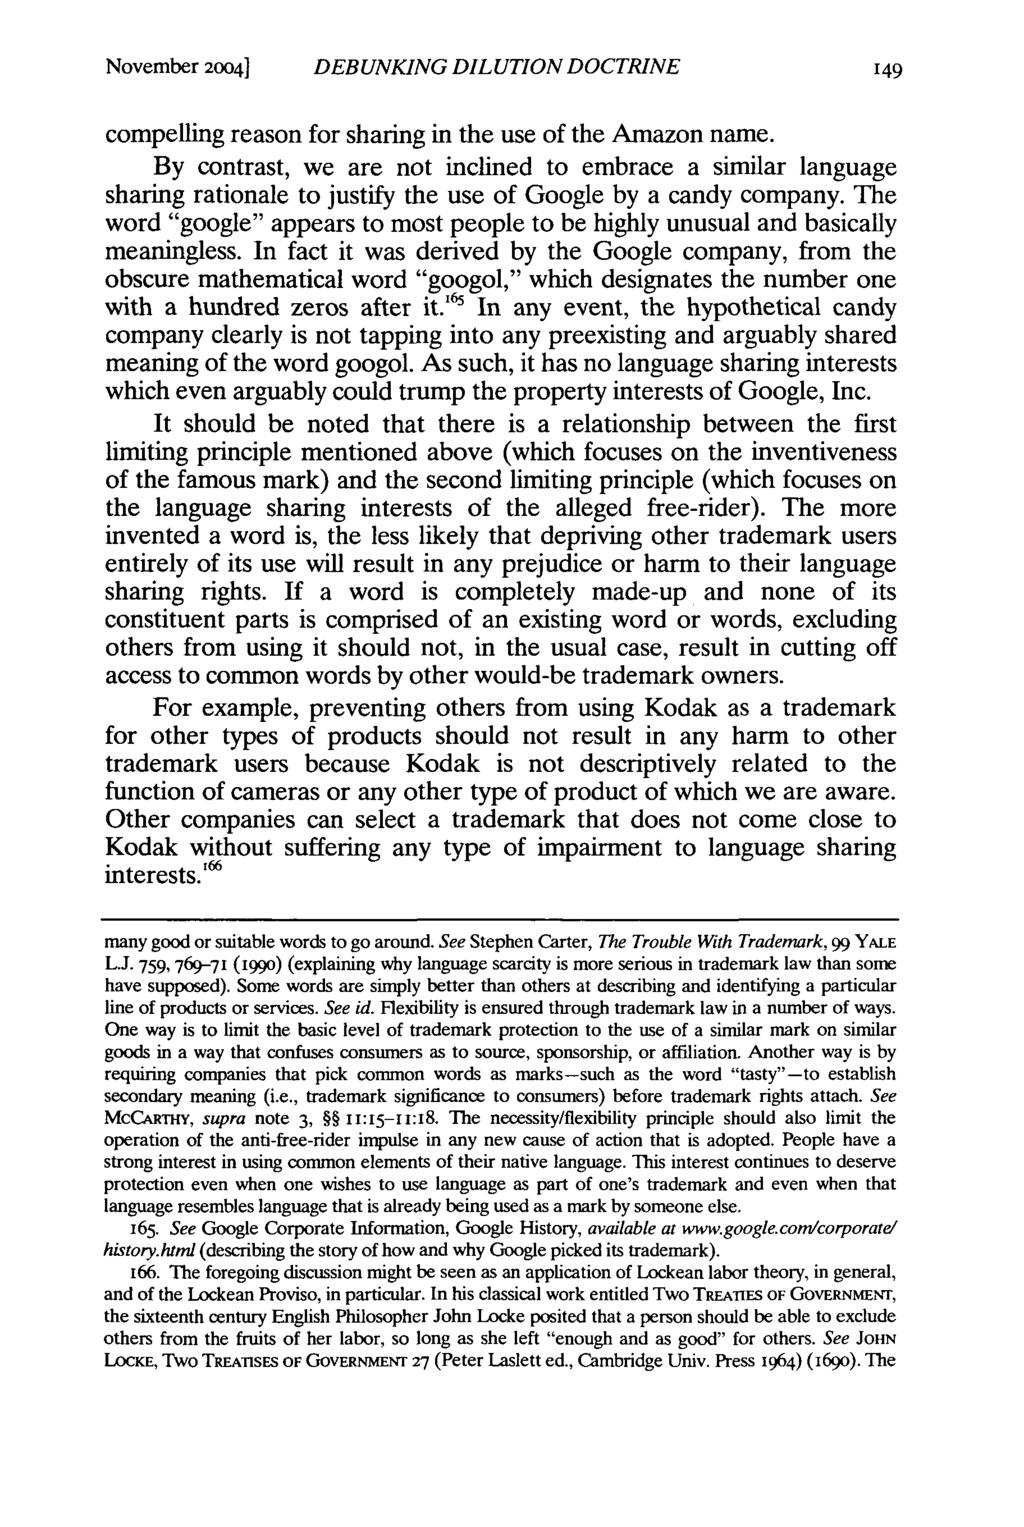 November 2004] DEBUNKING DILUTION DOCTRINE compelling reason for sharing in the use of the Amazon name.